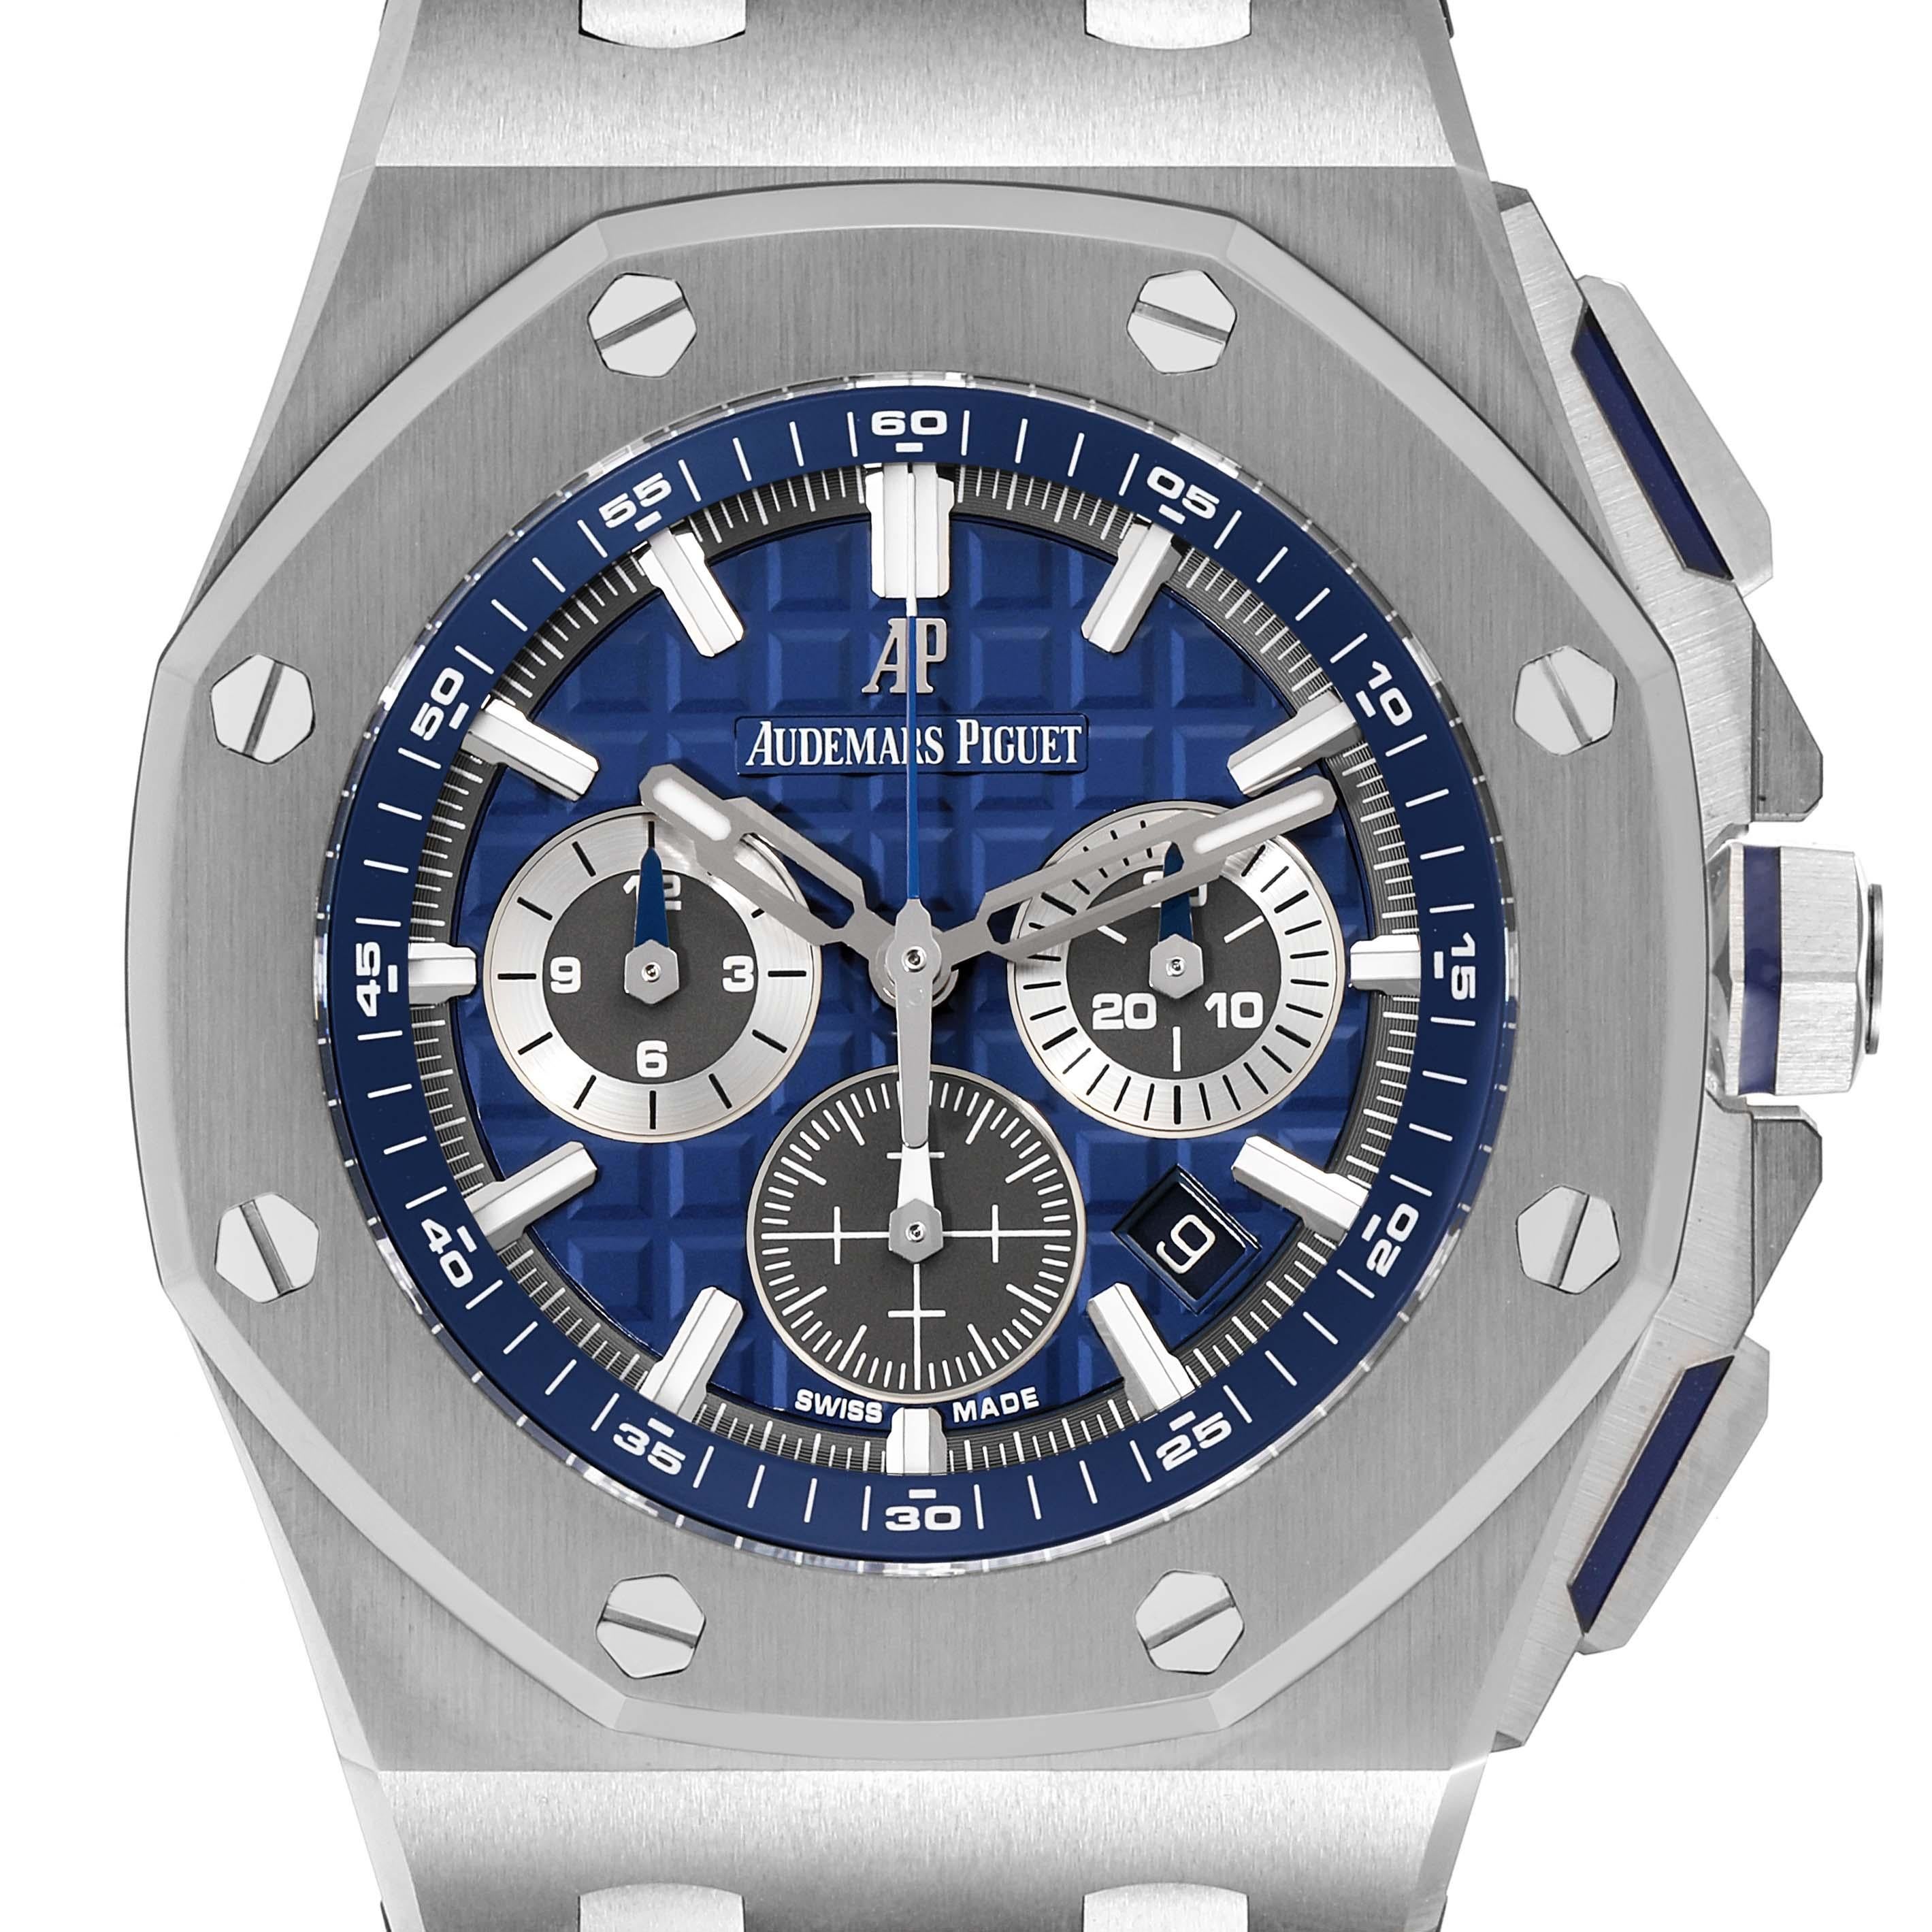 Audemars Piguet Royal Oak Offshore Chronograph Watch 26480TI Box Papers. Automatic self-winding movement. Stainless octagonal case 42 mm in diameter. Case thickness: 12.9 mm. Solid case back. Titanium bezel punctuated with 8 signature screws.